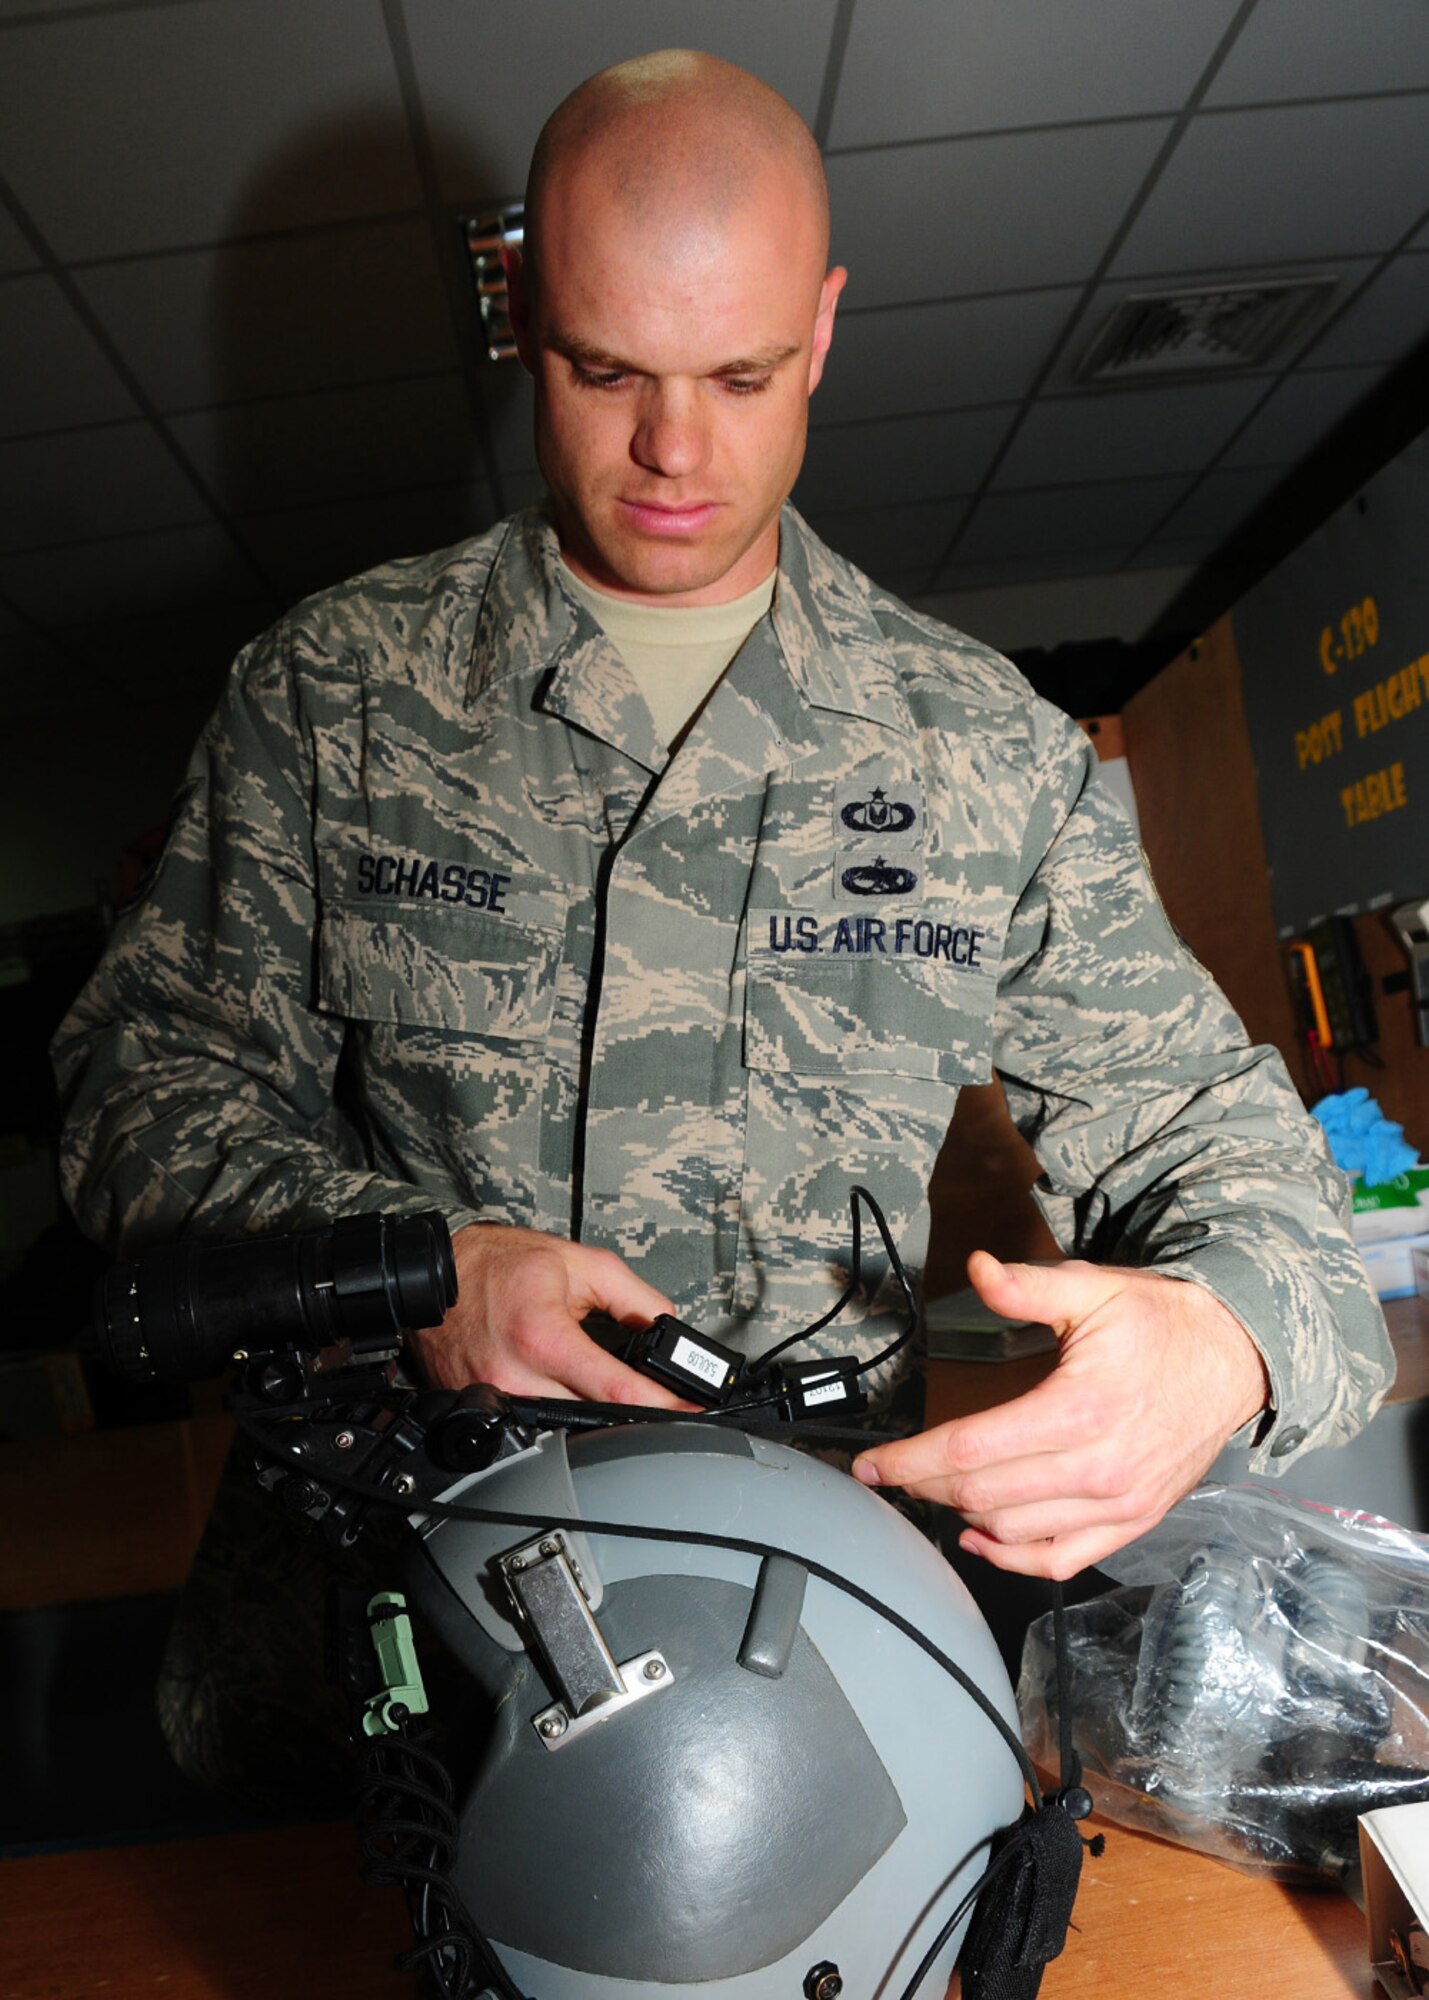 SOUTHWEST ASIA -- Tech. Sgt. Nathan Schasse, 817th Expeditionary Airlift Squadron, checks the overall fit of the night vision goggle and battery pack to the helmet at an air base in Southwest Asia, June 18. Sergeant Schasse also checks to make sure that there is no damage to the battery pack and ensures the pack is secure on the low-profile mount. Sergeant Schasse is deployed from McChord Air Force Base, Wash., and is originally from Madison, Wis. (U.S. Air Force photo/Senior Airman Courtney Richardson)